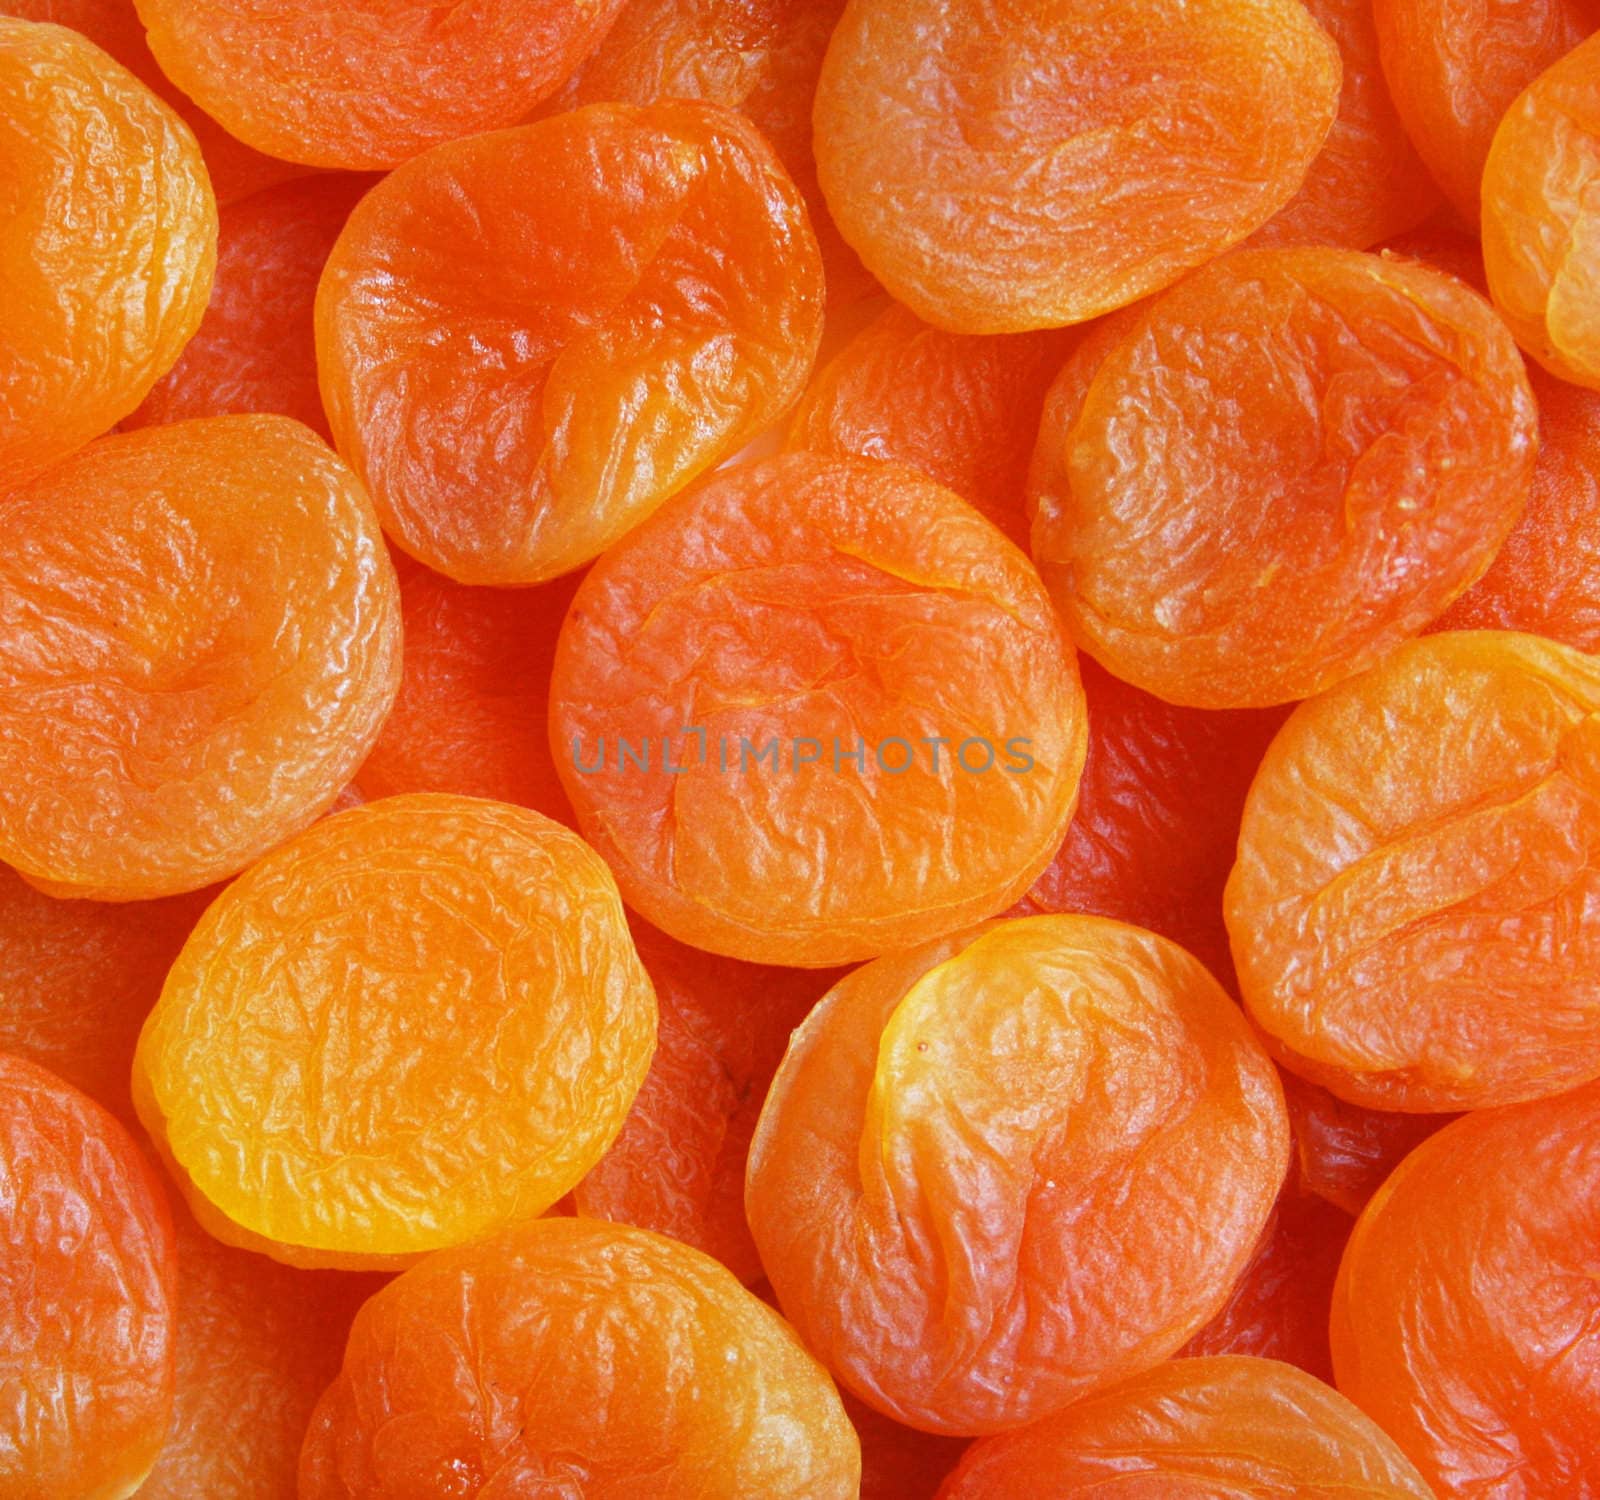 Dry apricots can use as background 